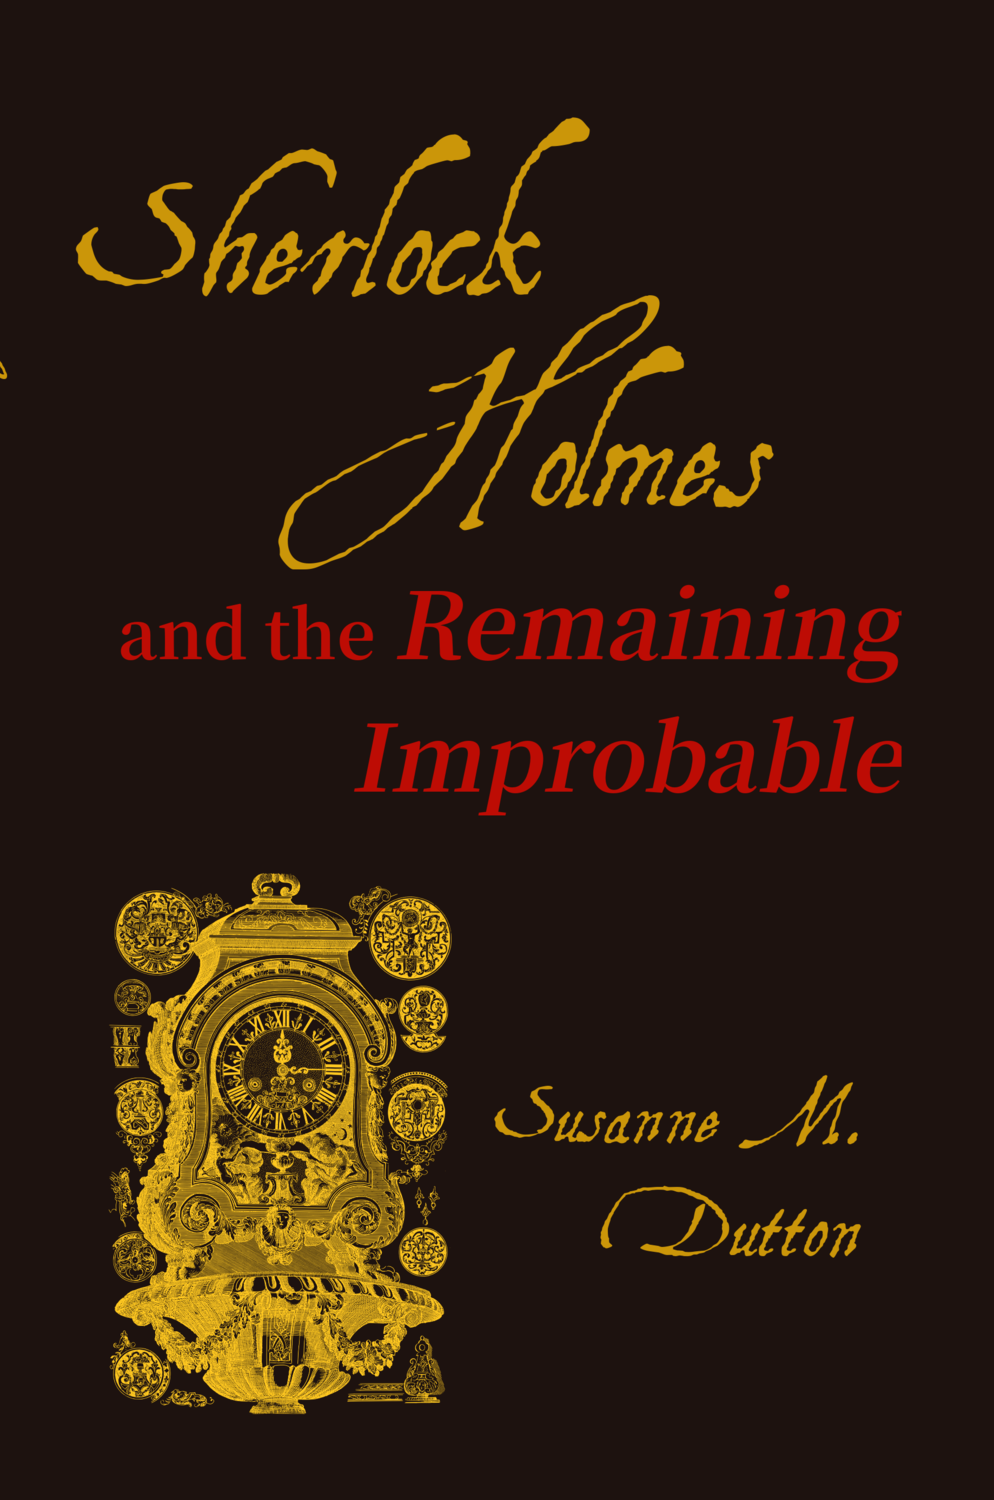 Sherlock Holmes and the Remaining Improbable, by Susanne Dutton